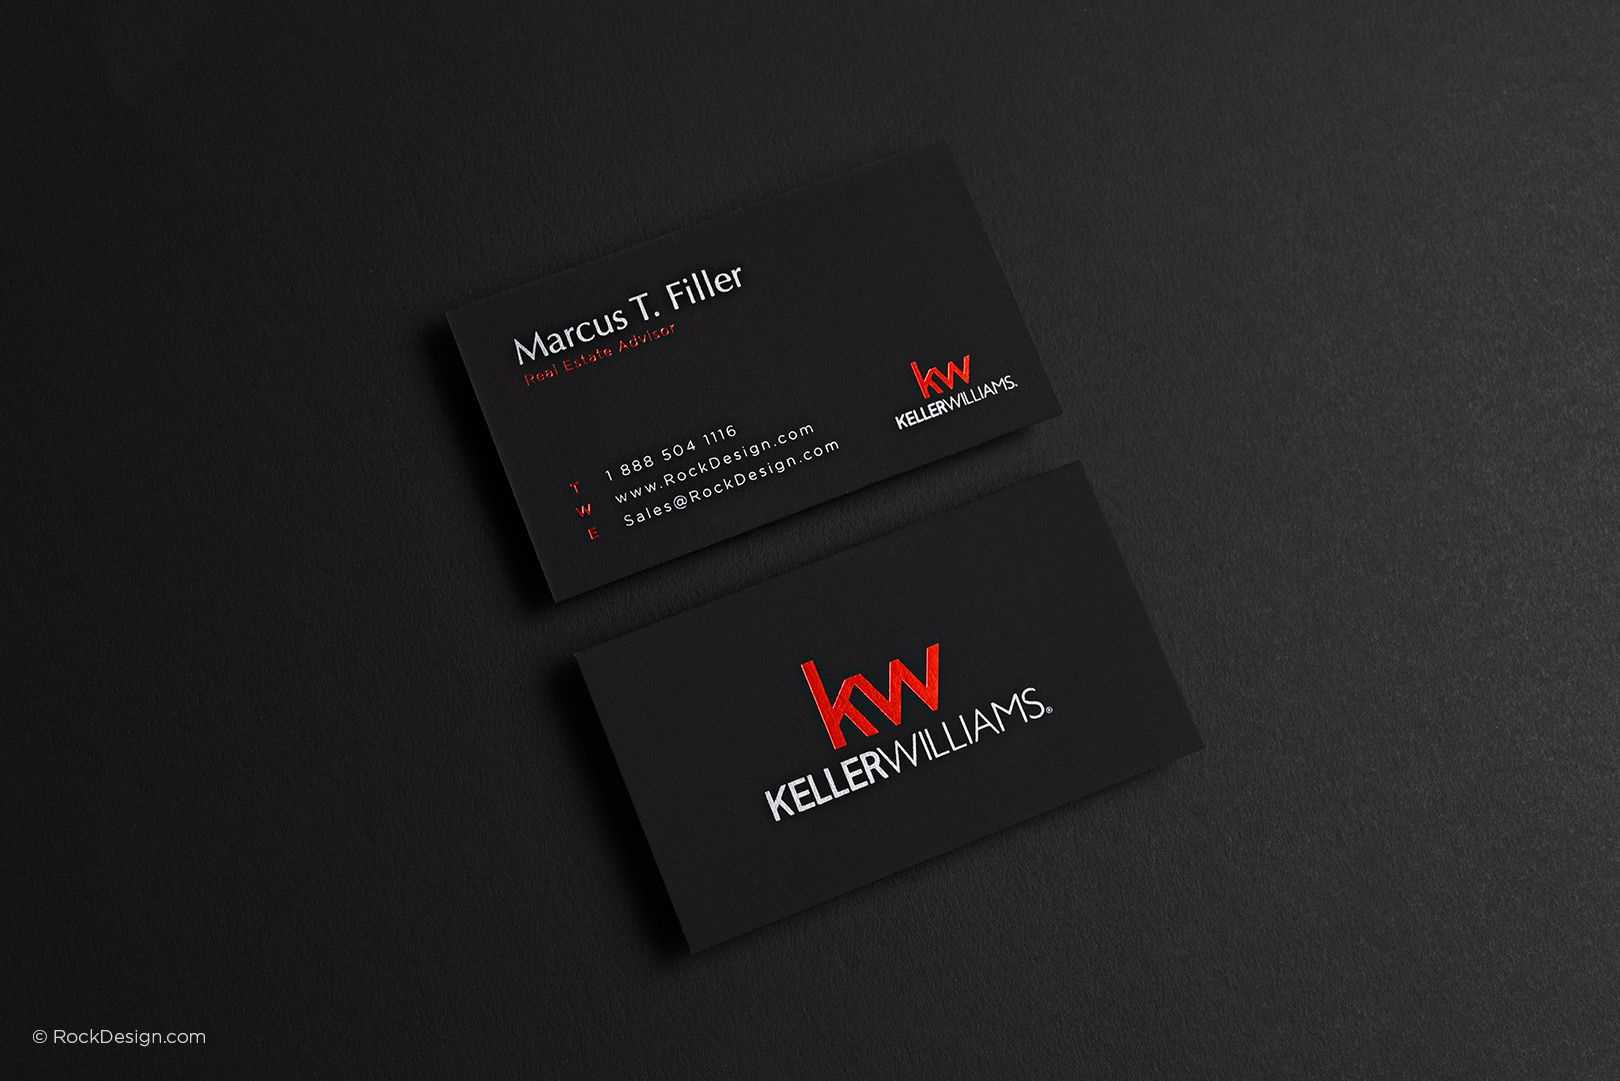 Modern Realtor Suede Card Design With Foil Stamping And Throughout Keller Williams Business Card Templates